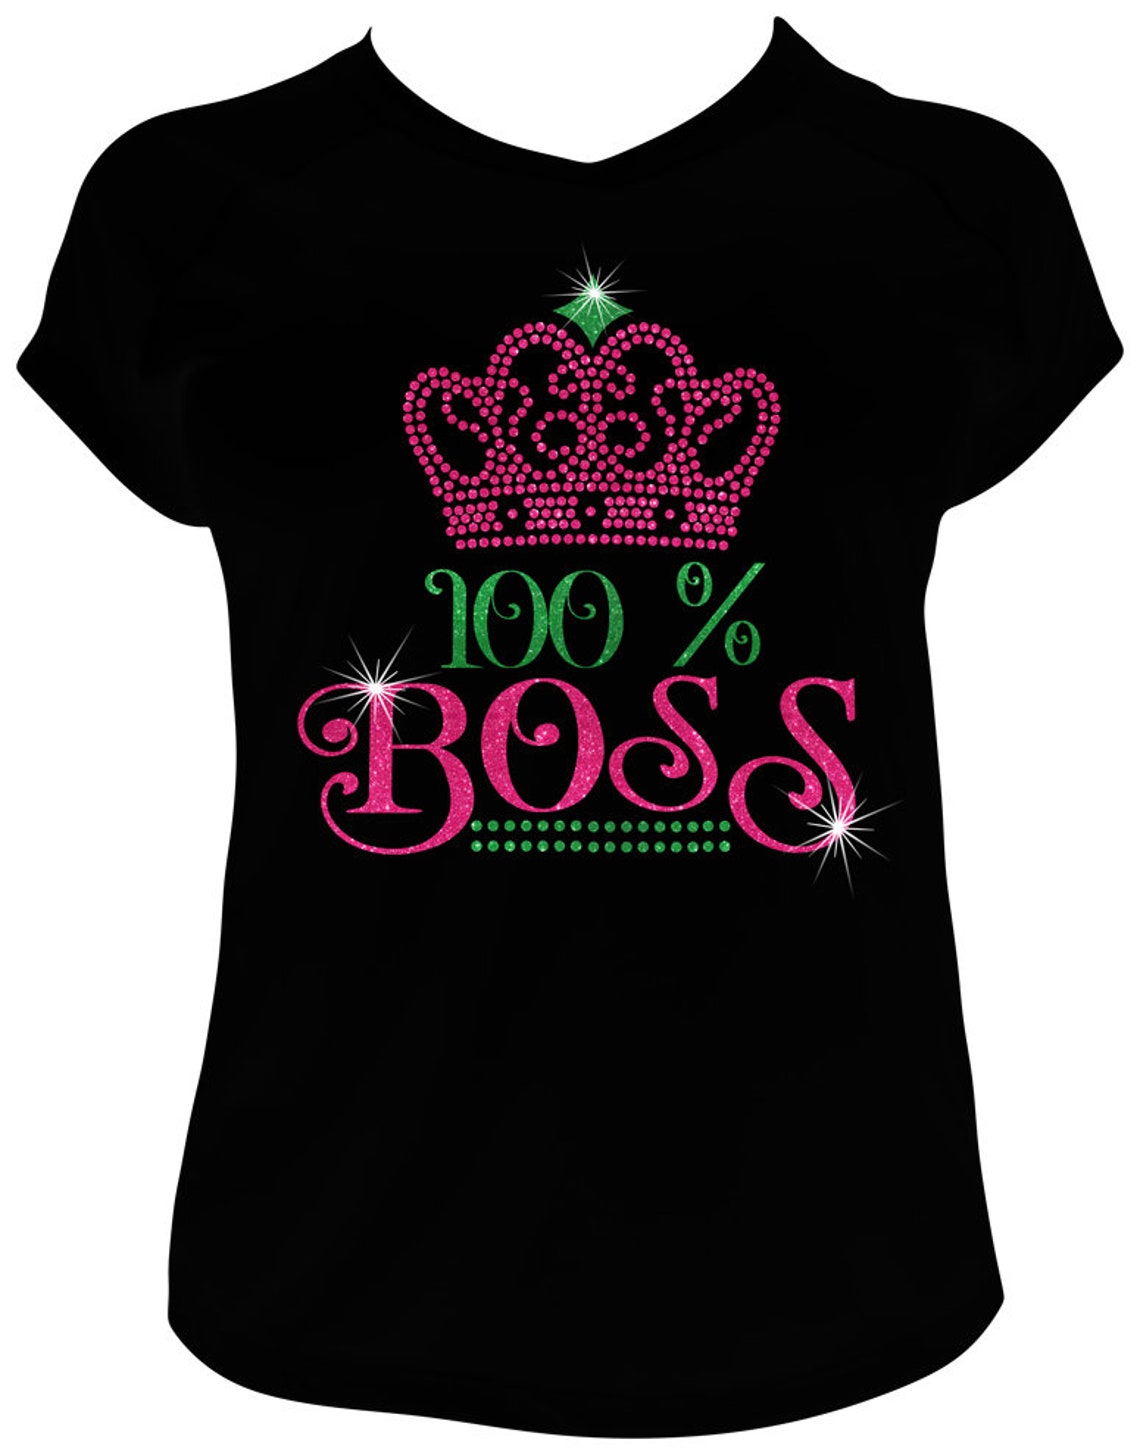 100 % BOSS With FAUx RhinESTONE BLINg CROWN svg PLUs all | Etsy